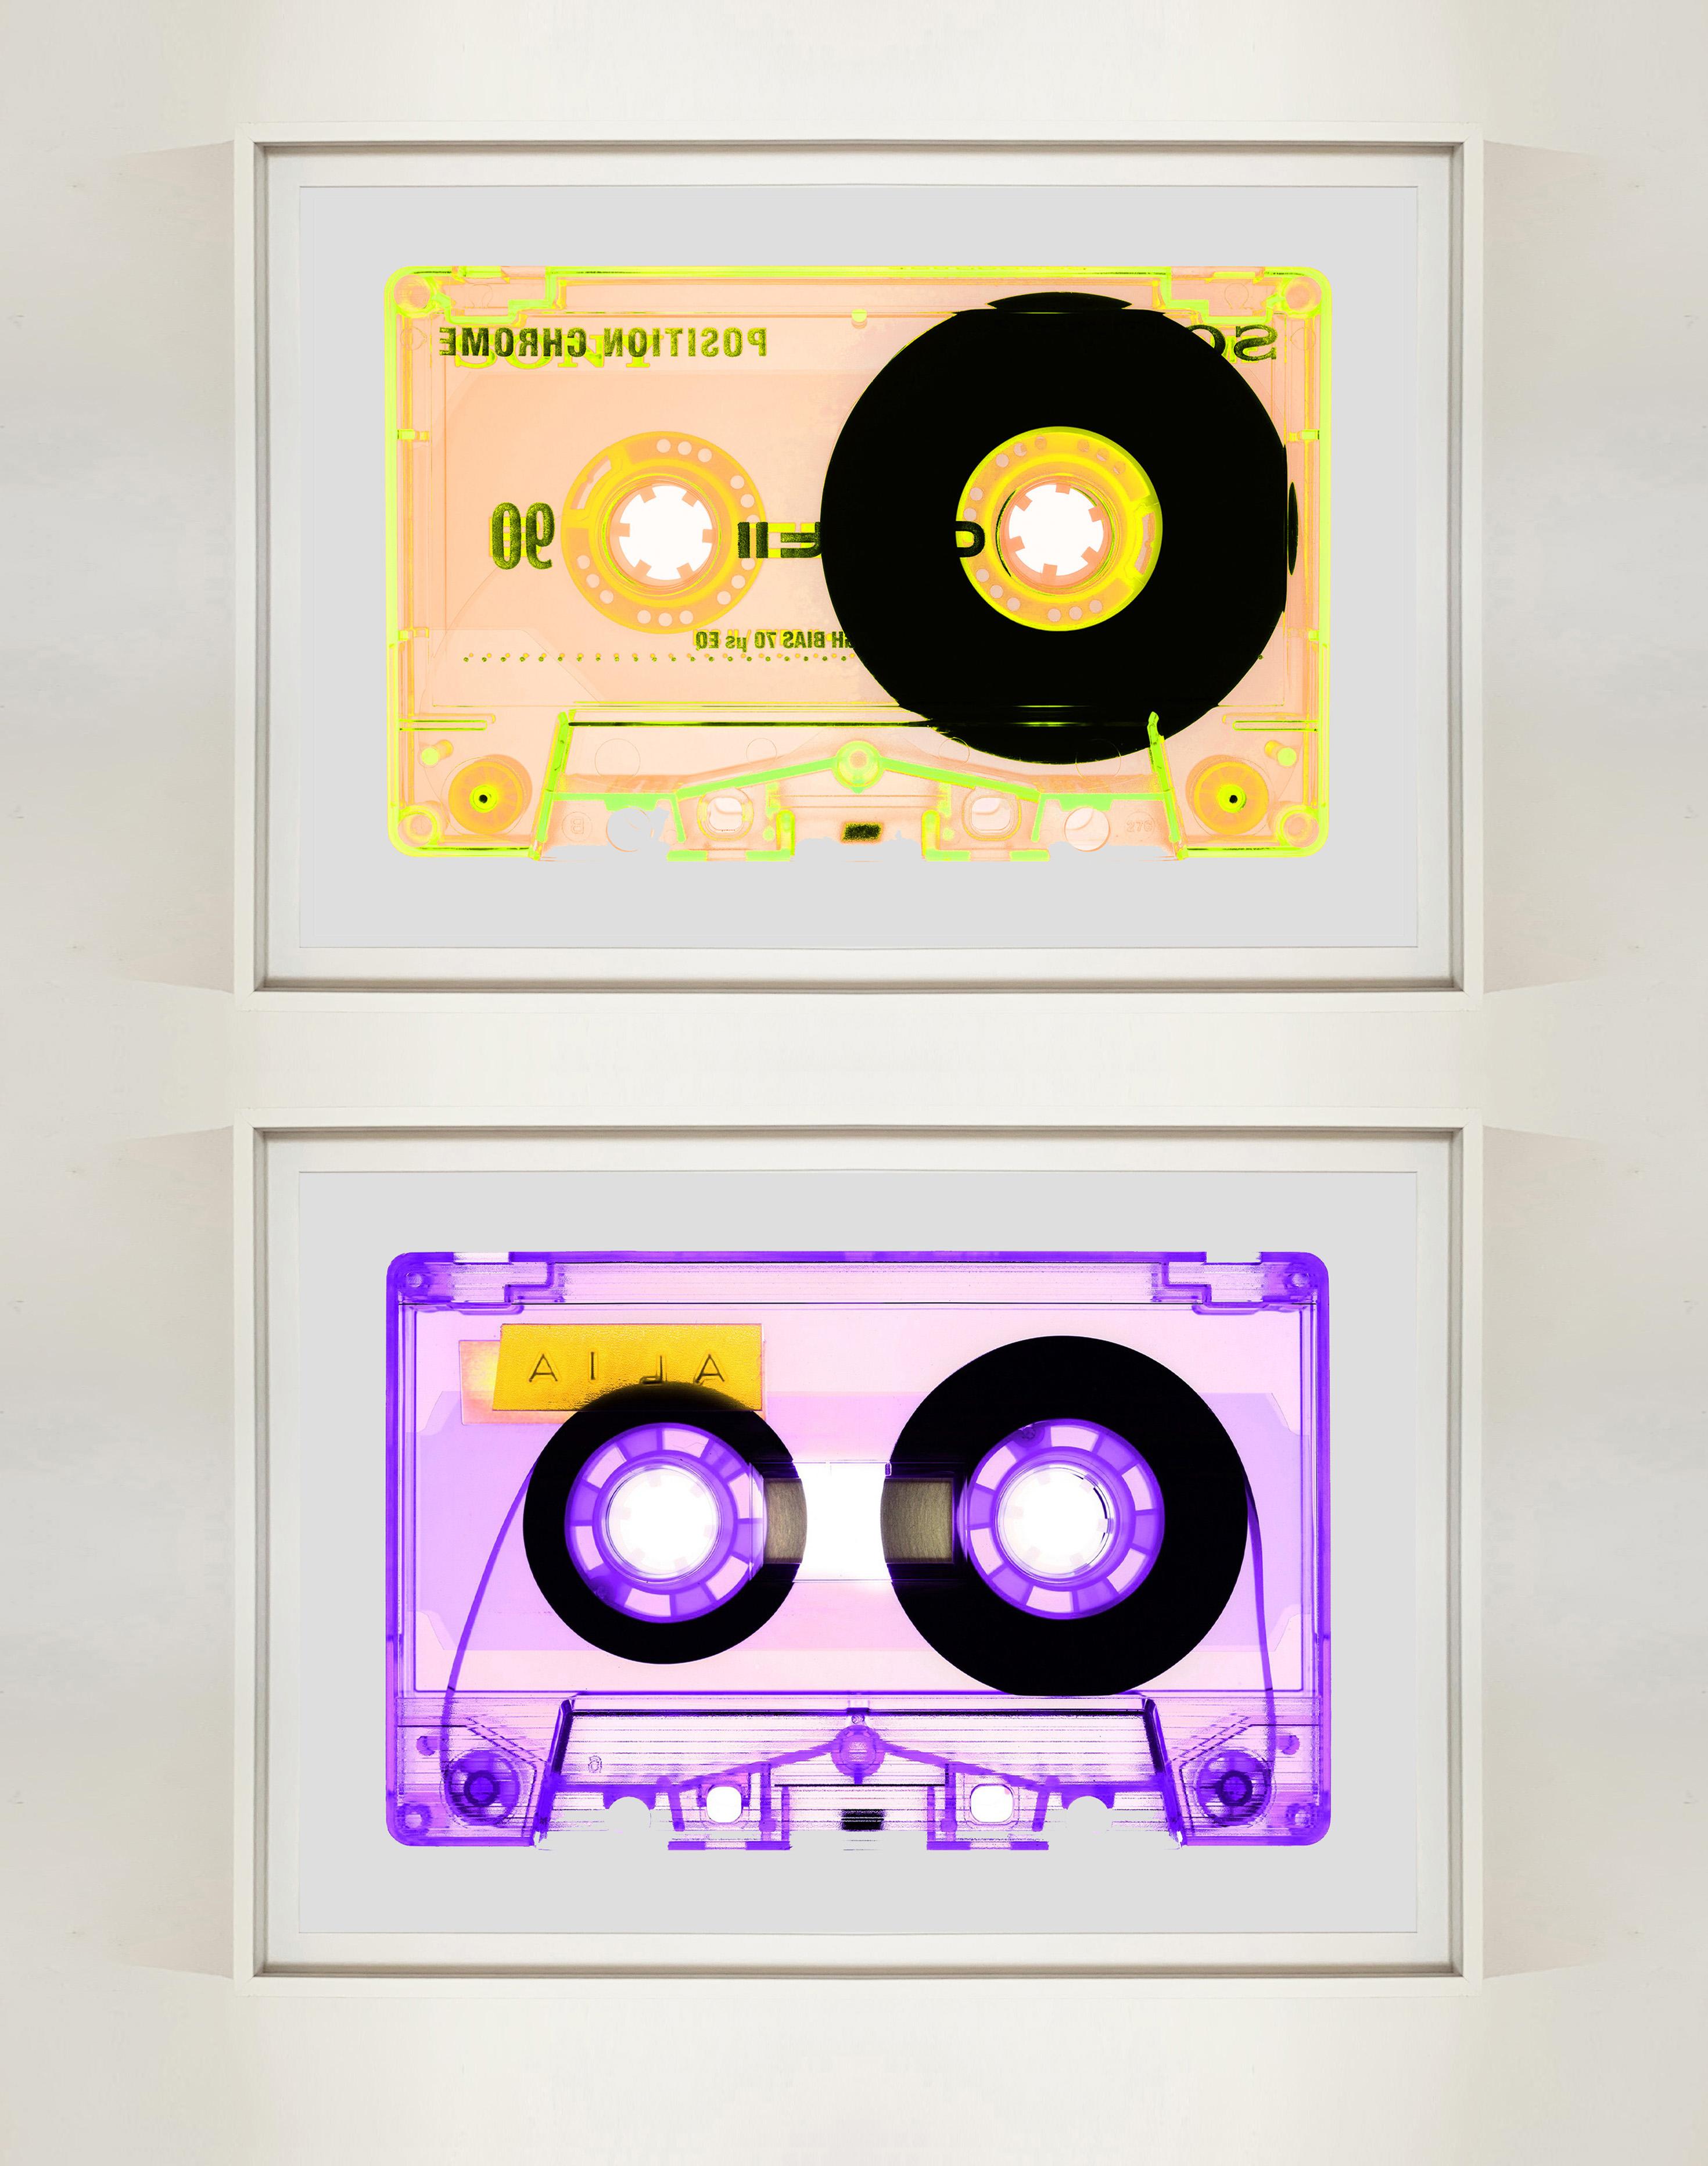 Tape Collection, Chrome Tutti Frutti - Contemporary Pop Art Color Photography - Orange Print by Heidler & Heeps